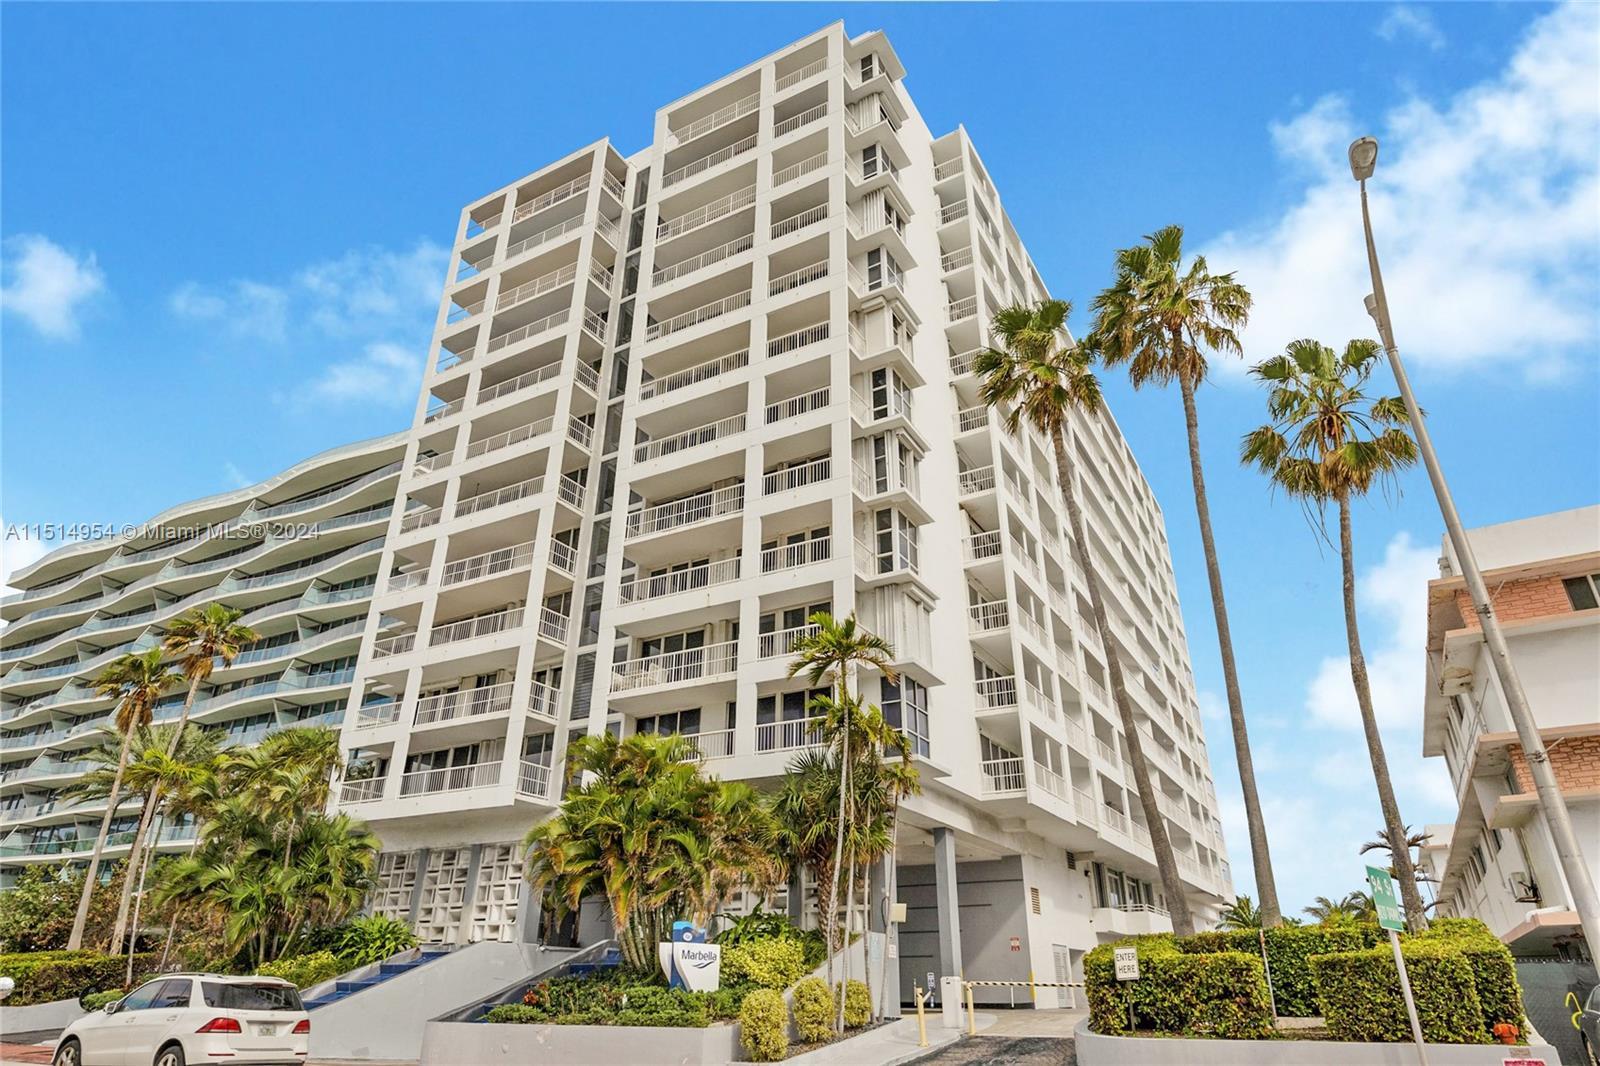 Photo of 9341 Collins Ave #705 in Surfside, FL